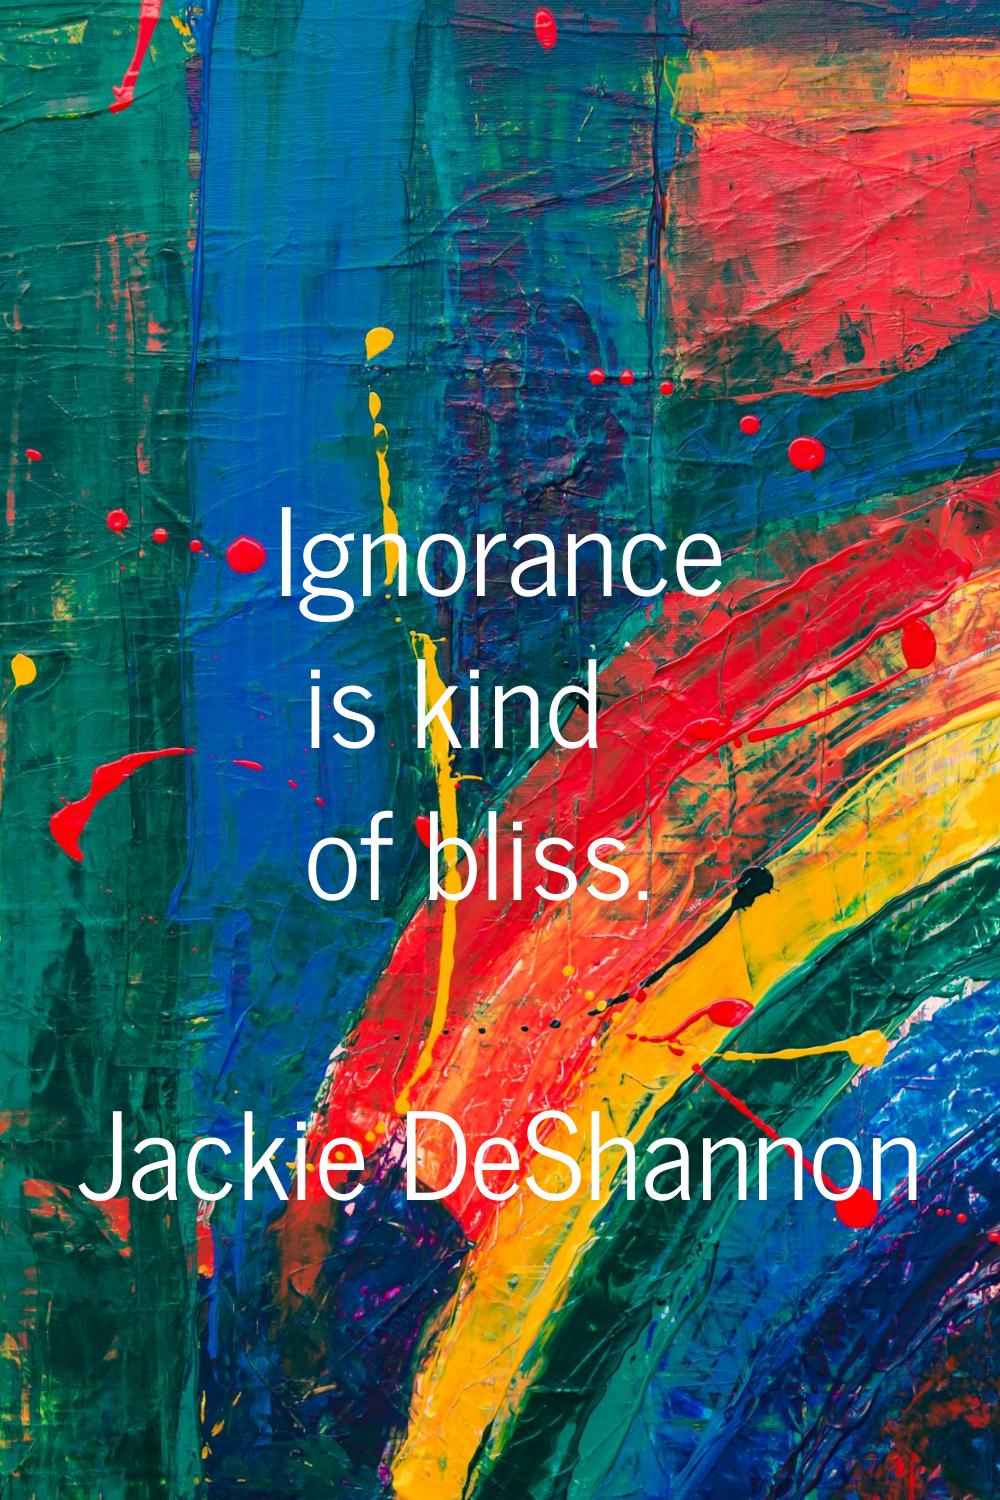 Ignorance is kind of bliss.